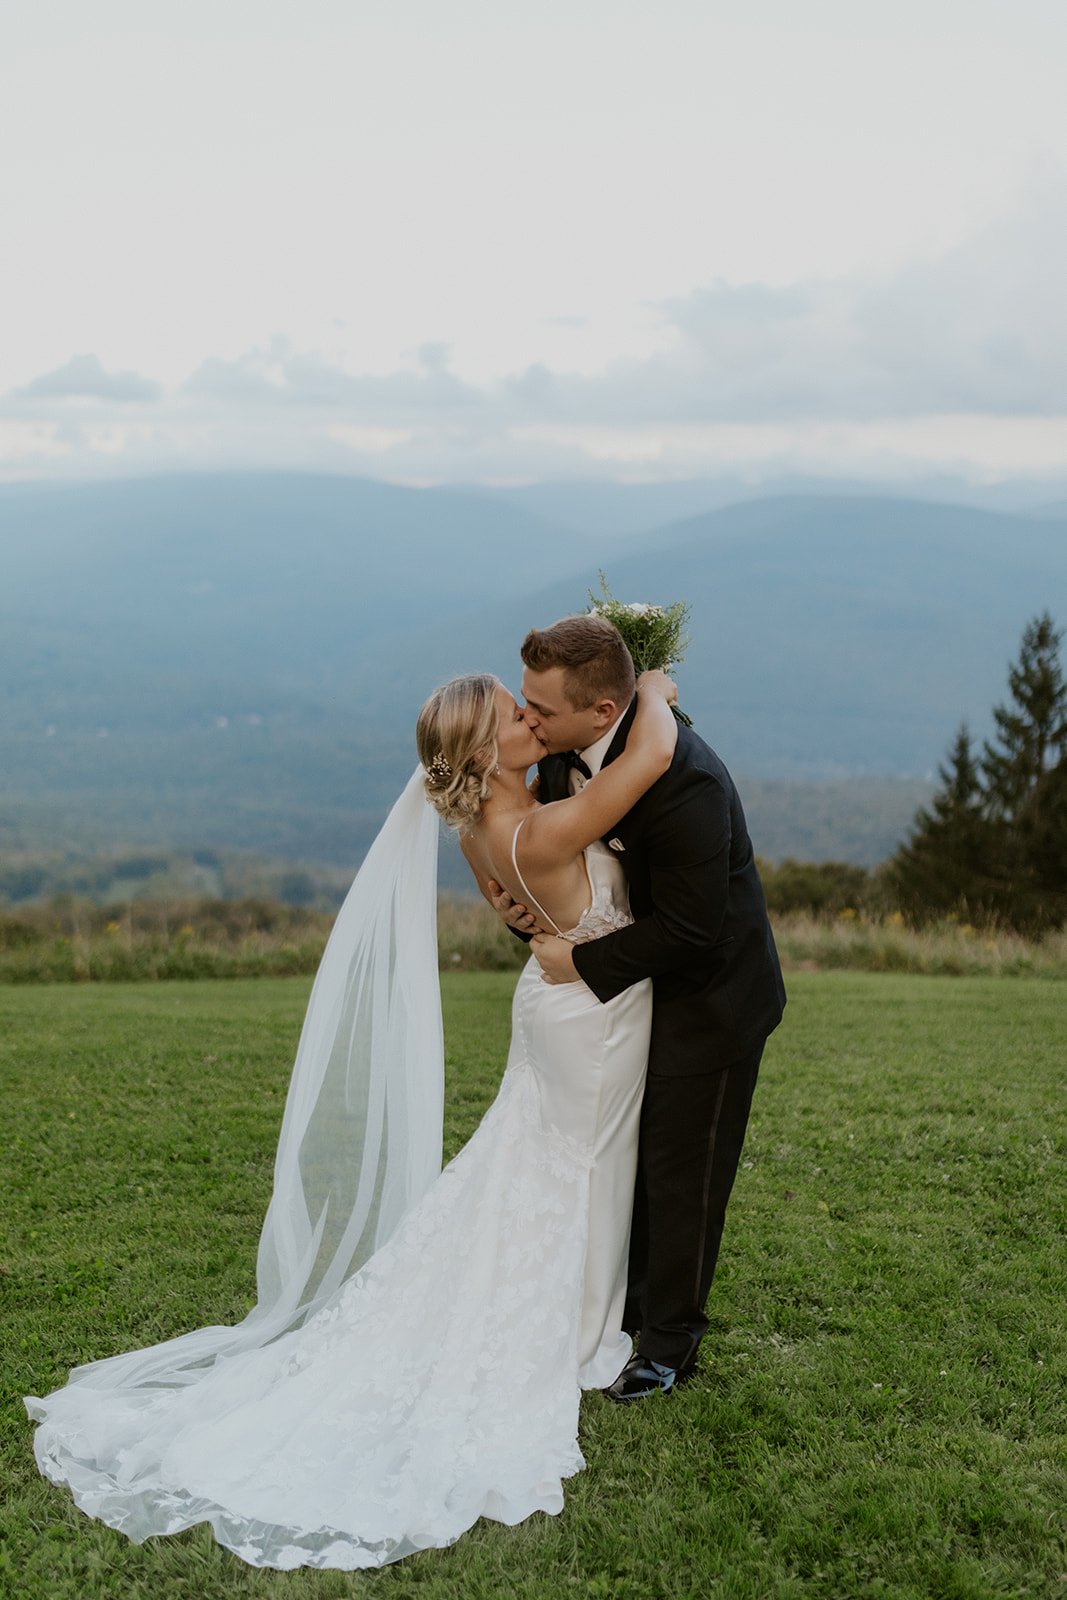 The bride and groom steal a kiss at the top of the mountain. The brides veil flows in the wind. 